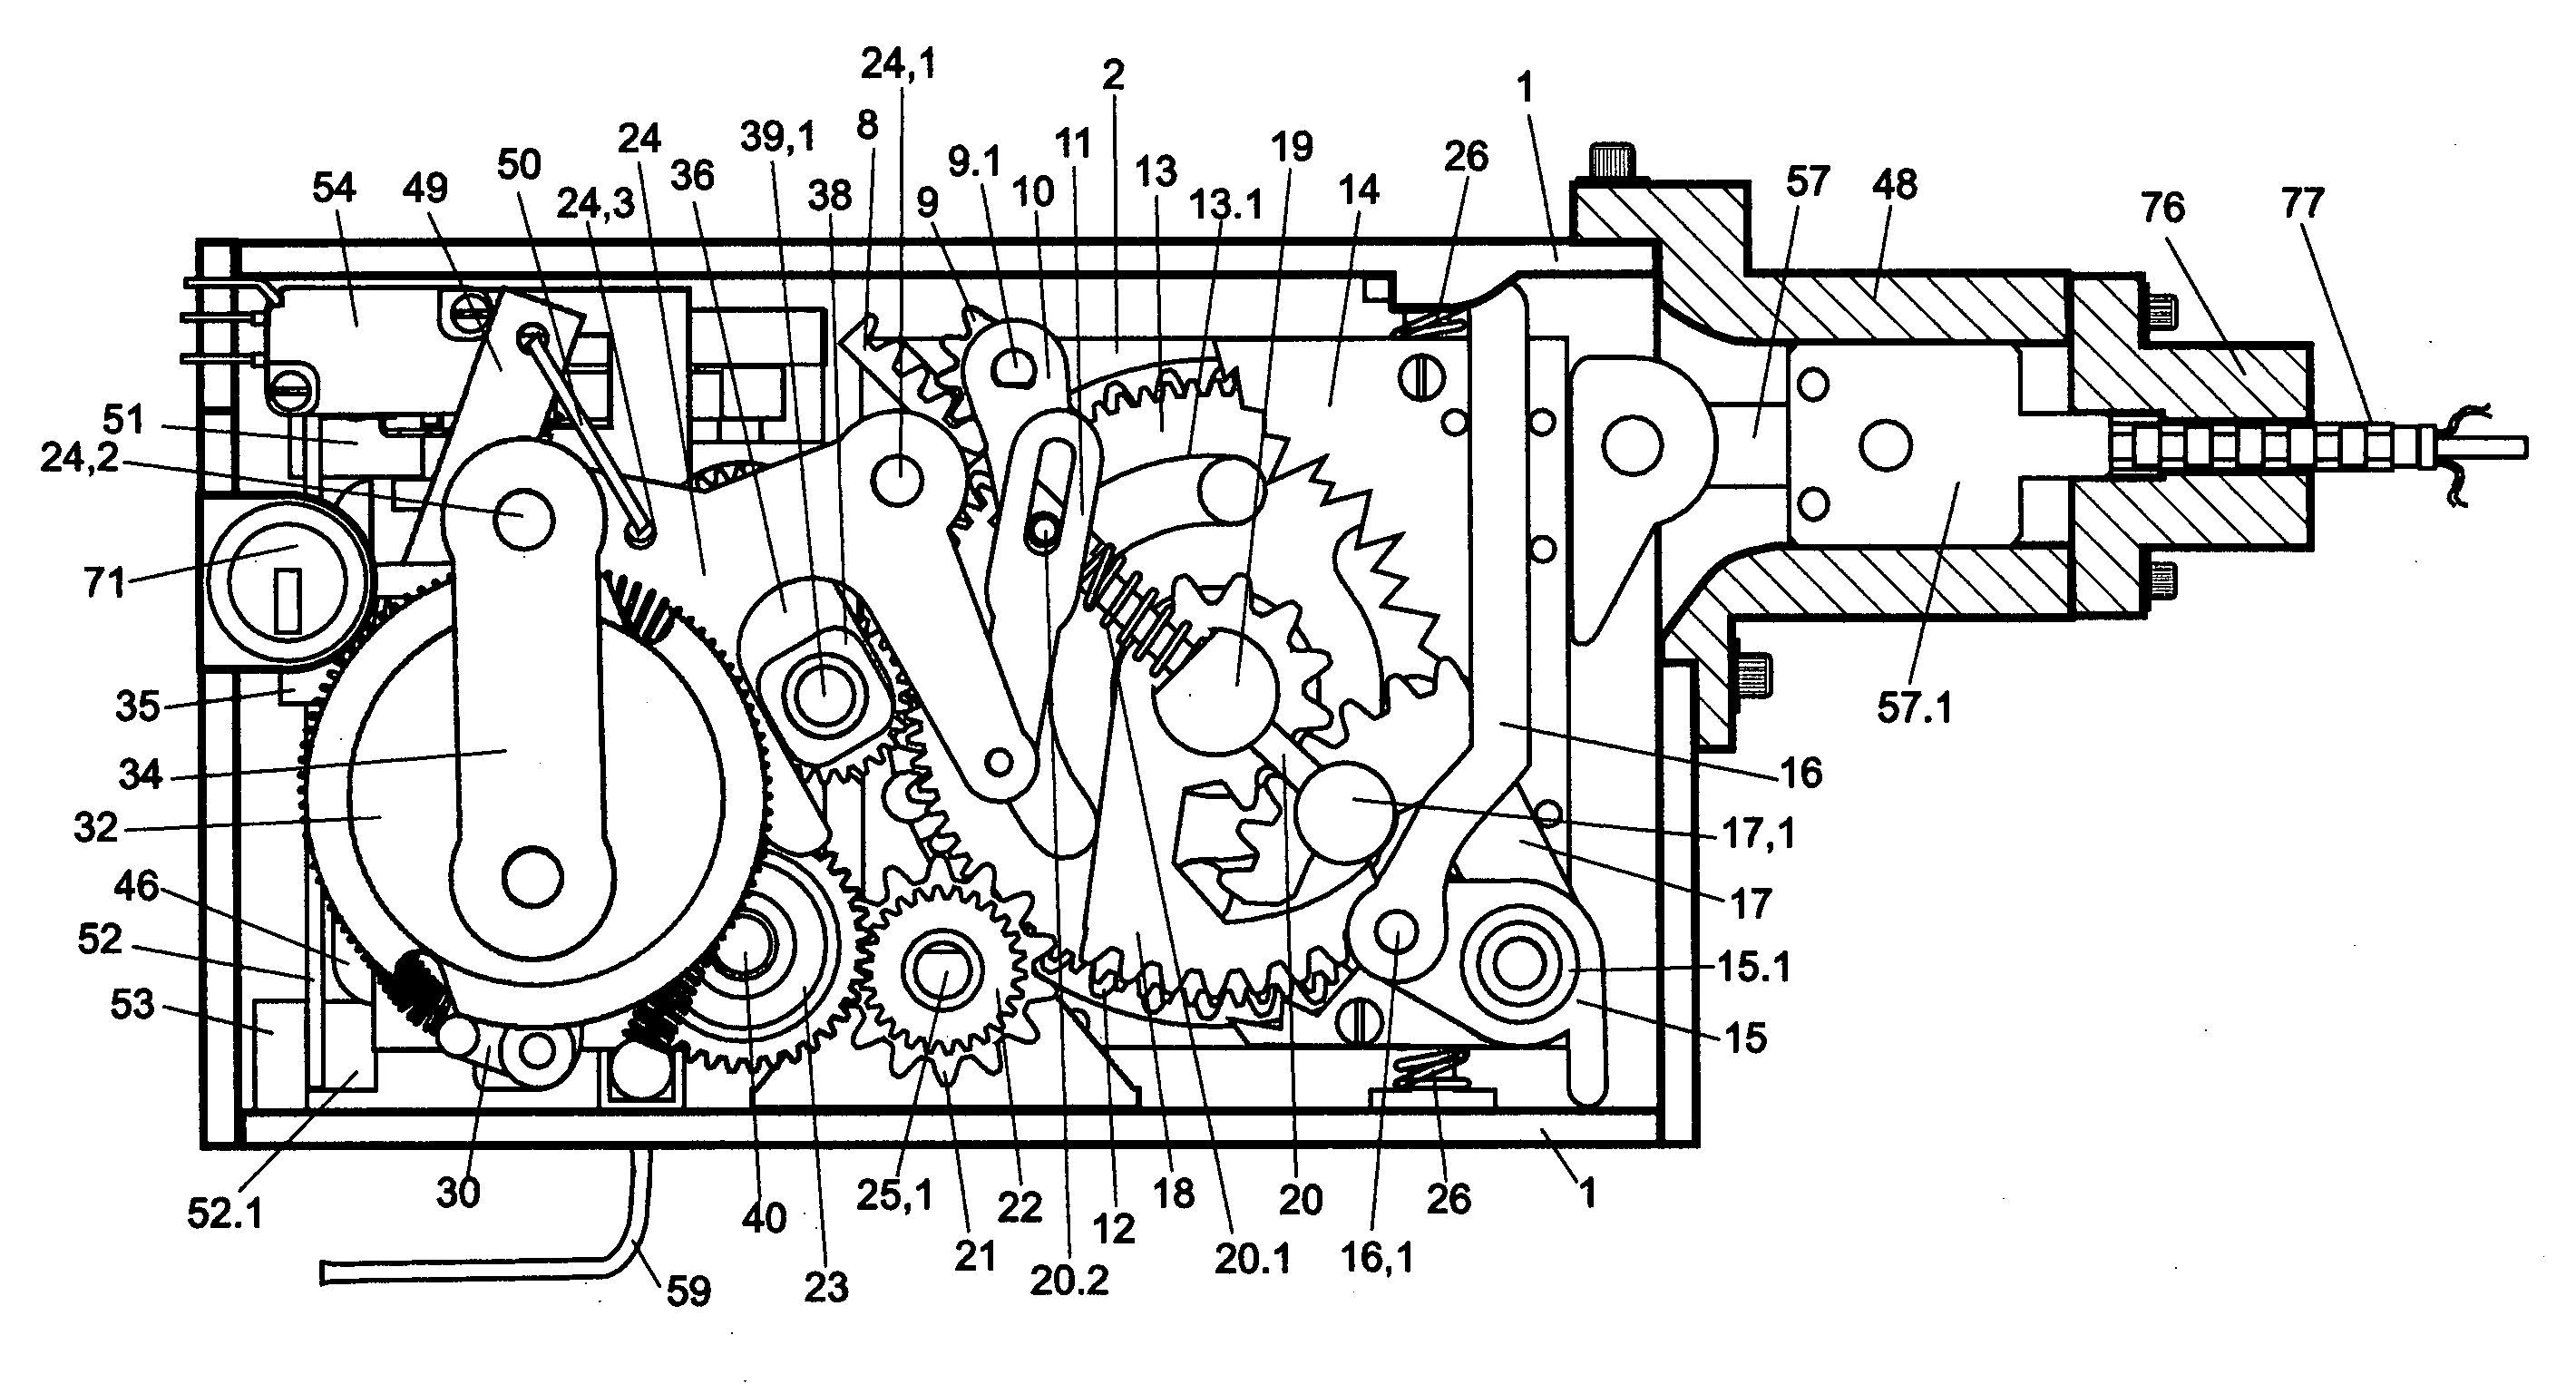 Multifunctional locking device and servomotor with actuator which can be up wound up around an interchangeable reel